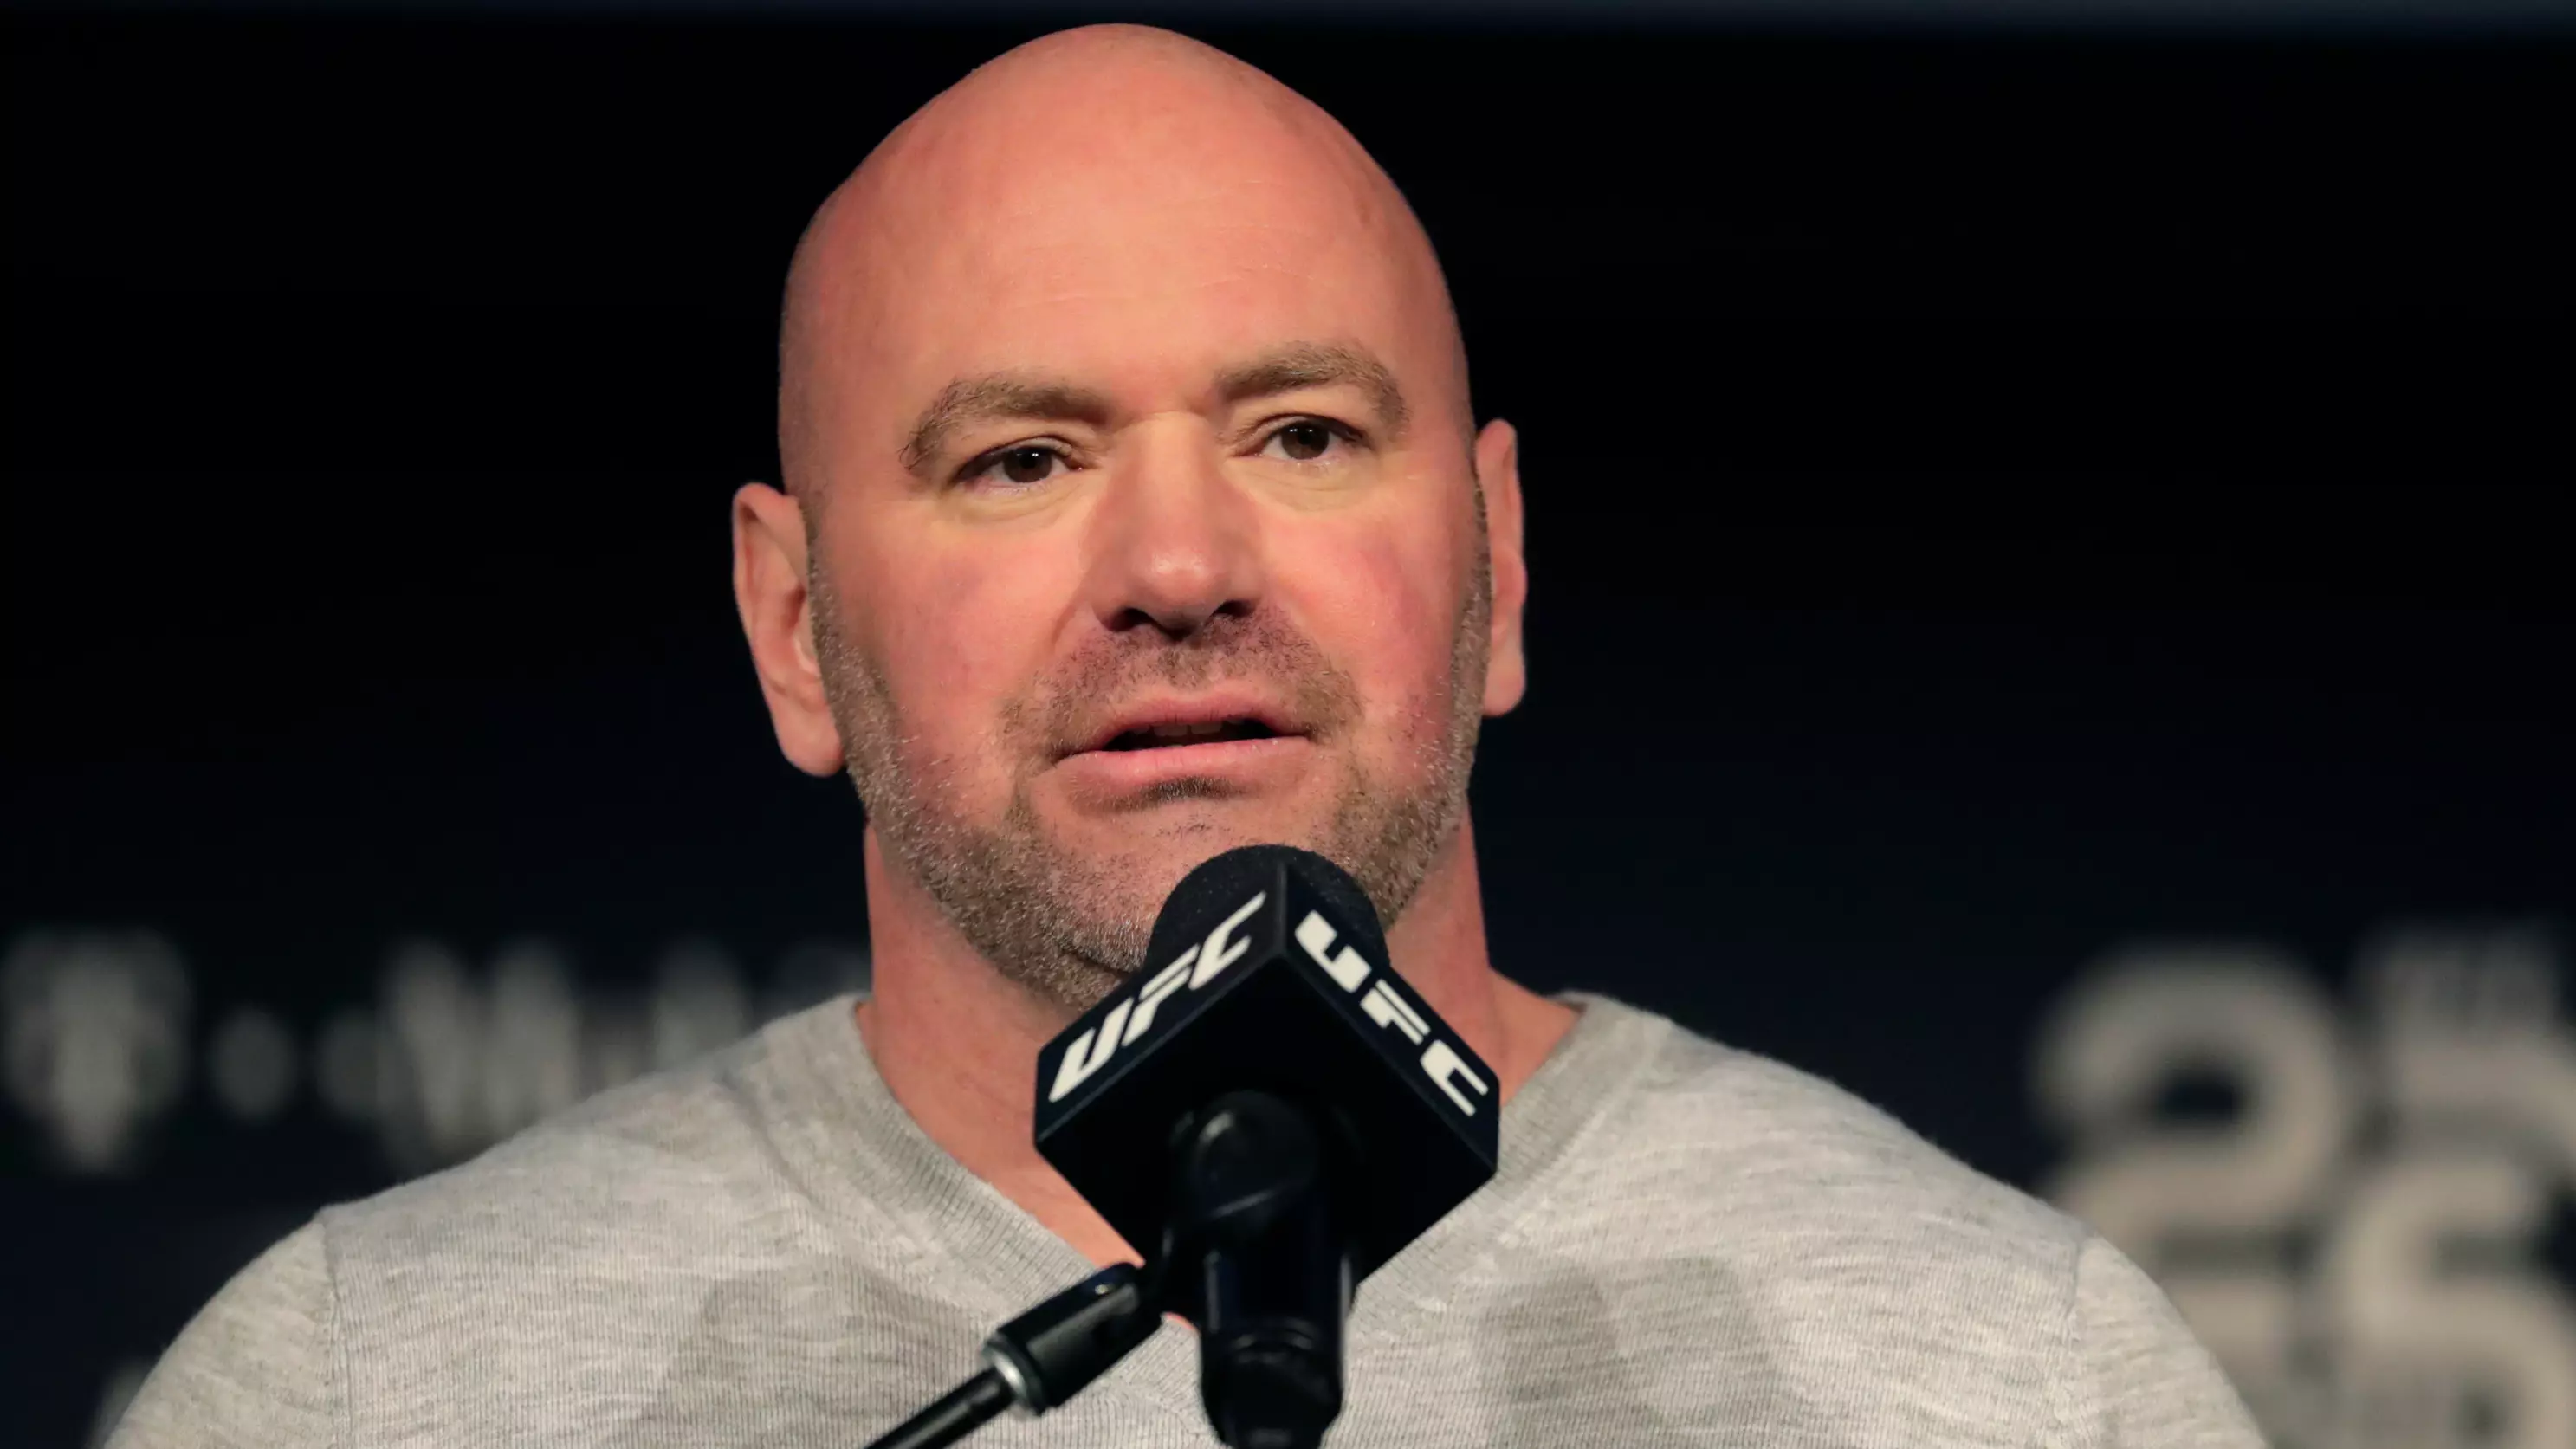 Dana White Unhappy With The Media For Leaking UFC Super-Fight Before Announcement